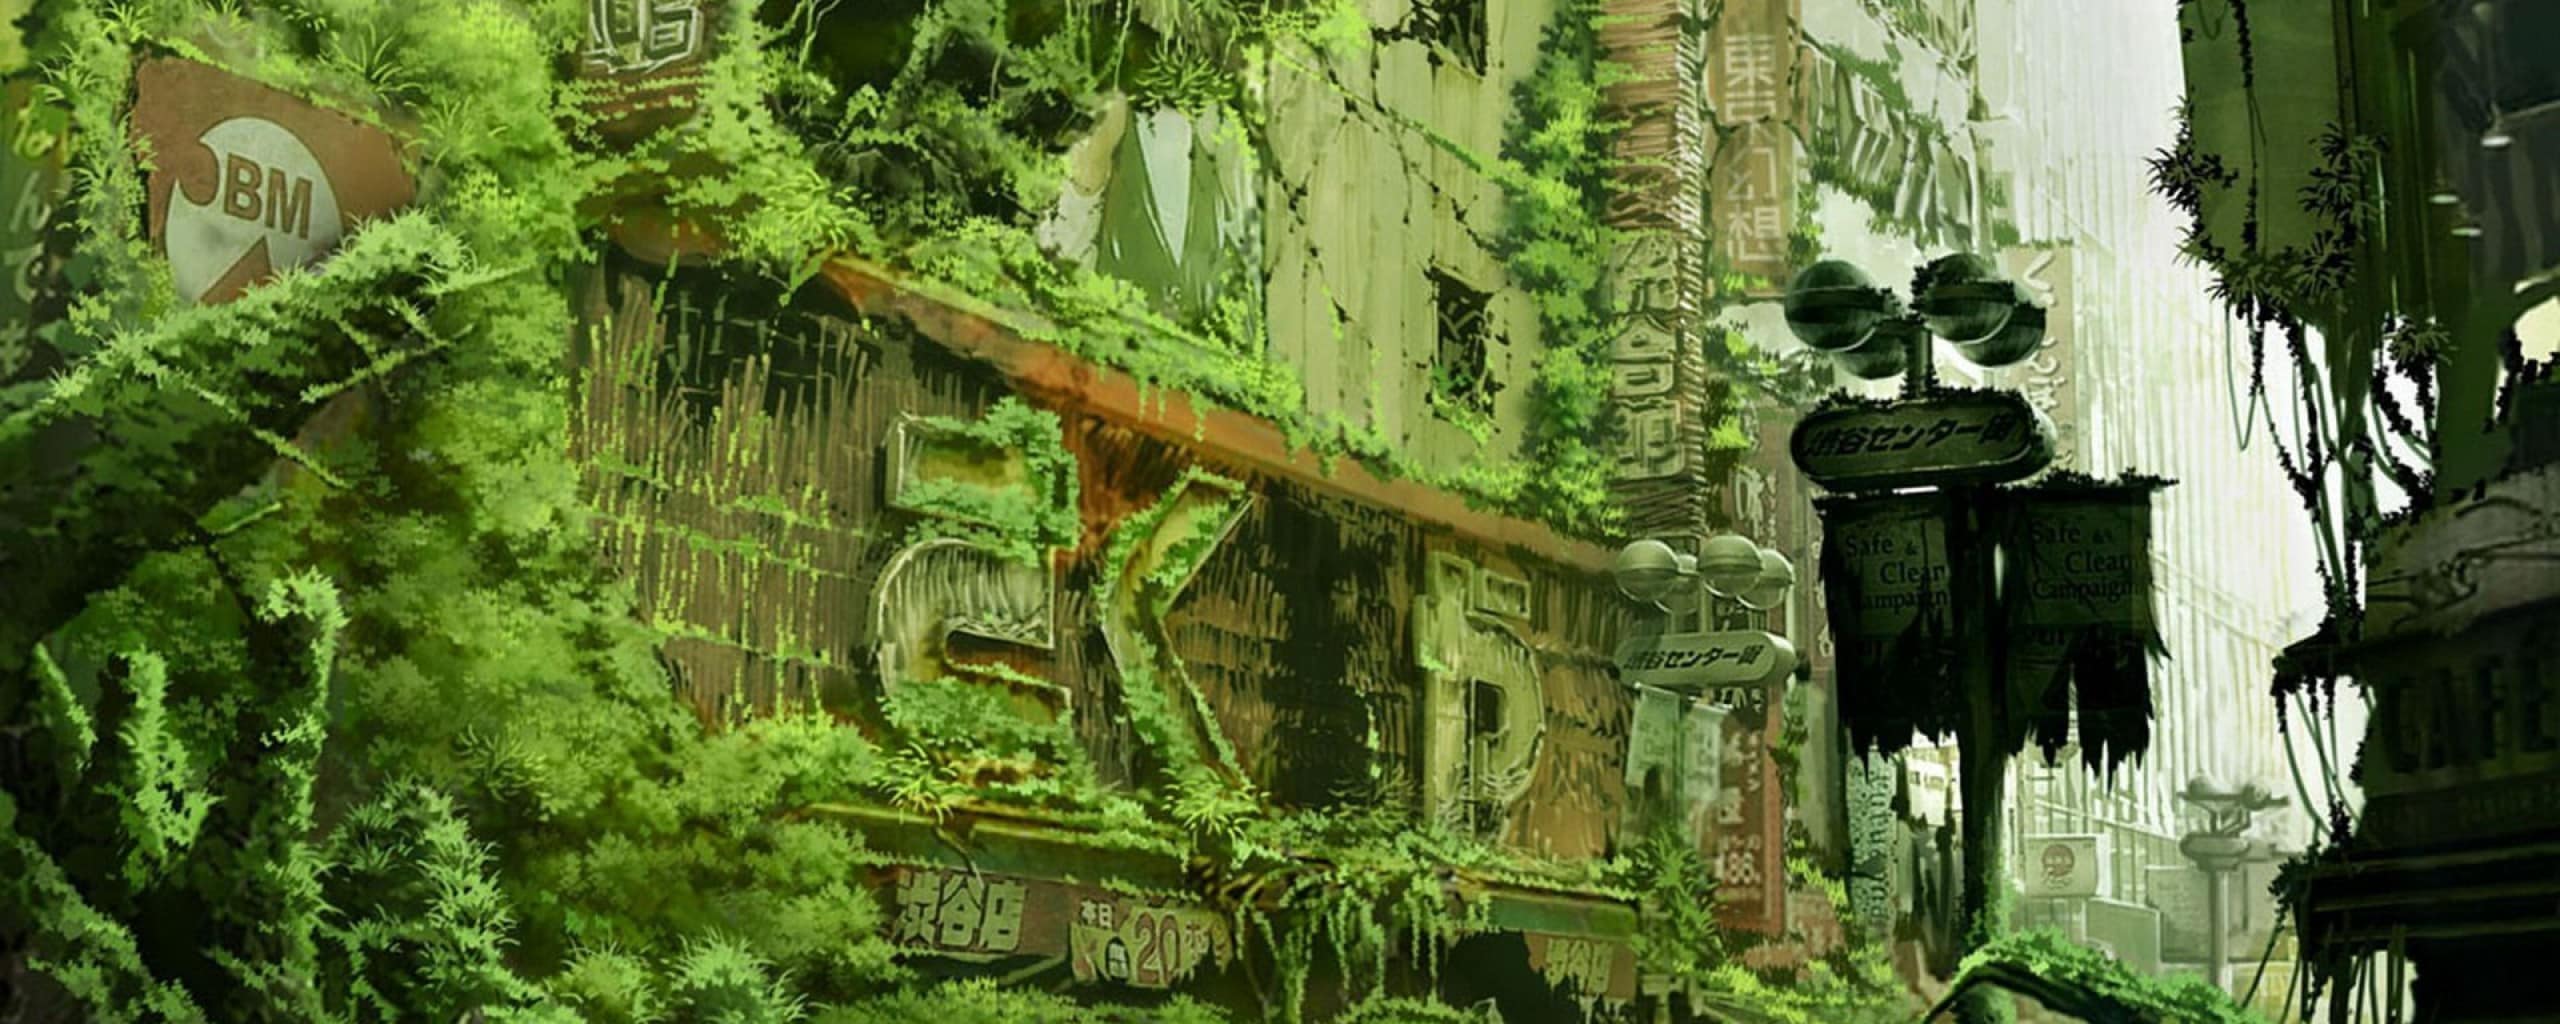 Overgrown industrial ruins reclaimed by nature in post-apocalyptic scene.